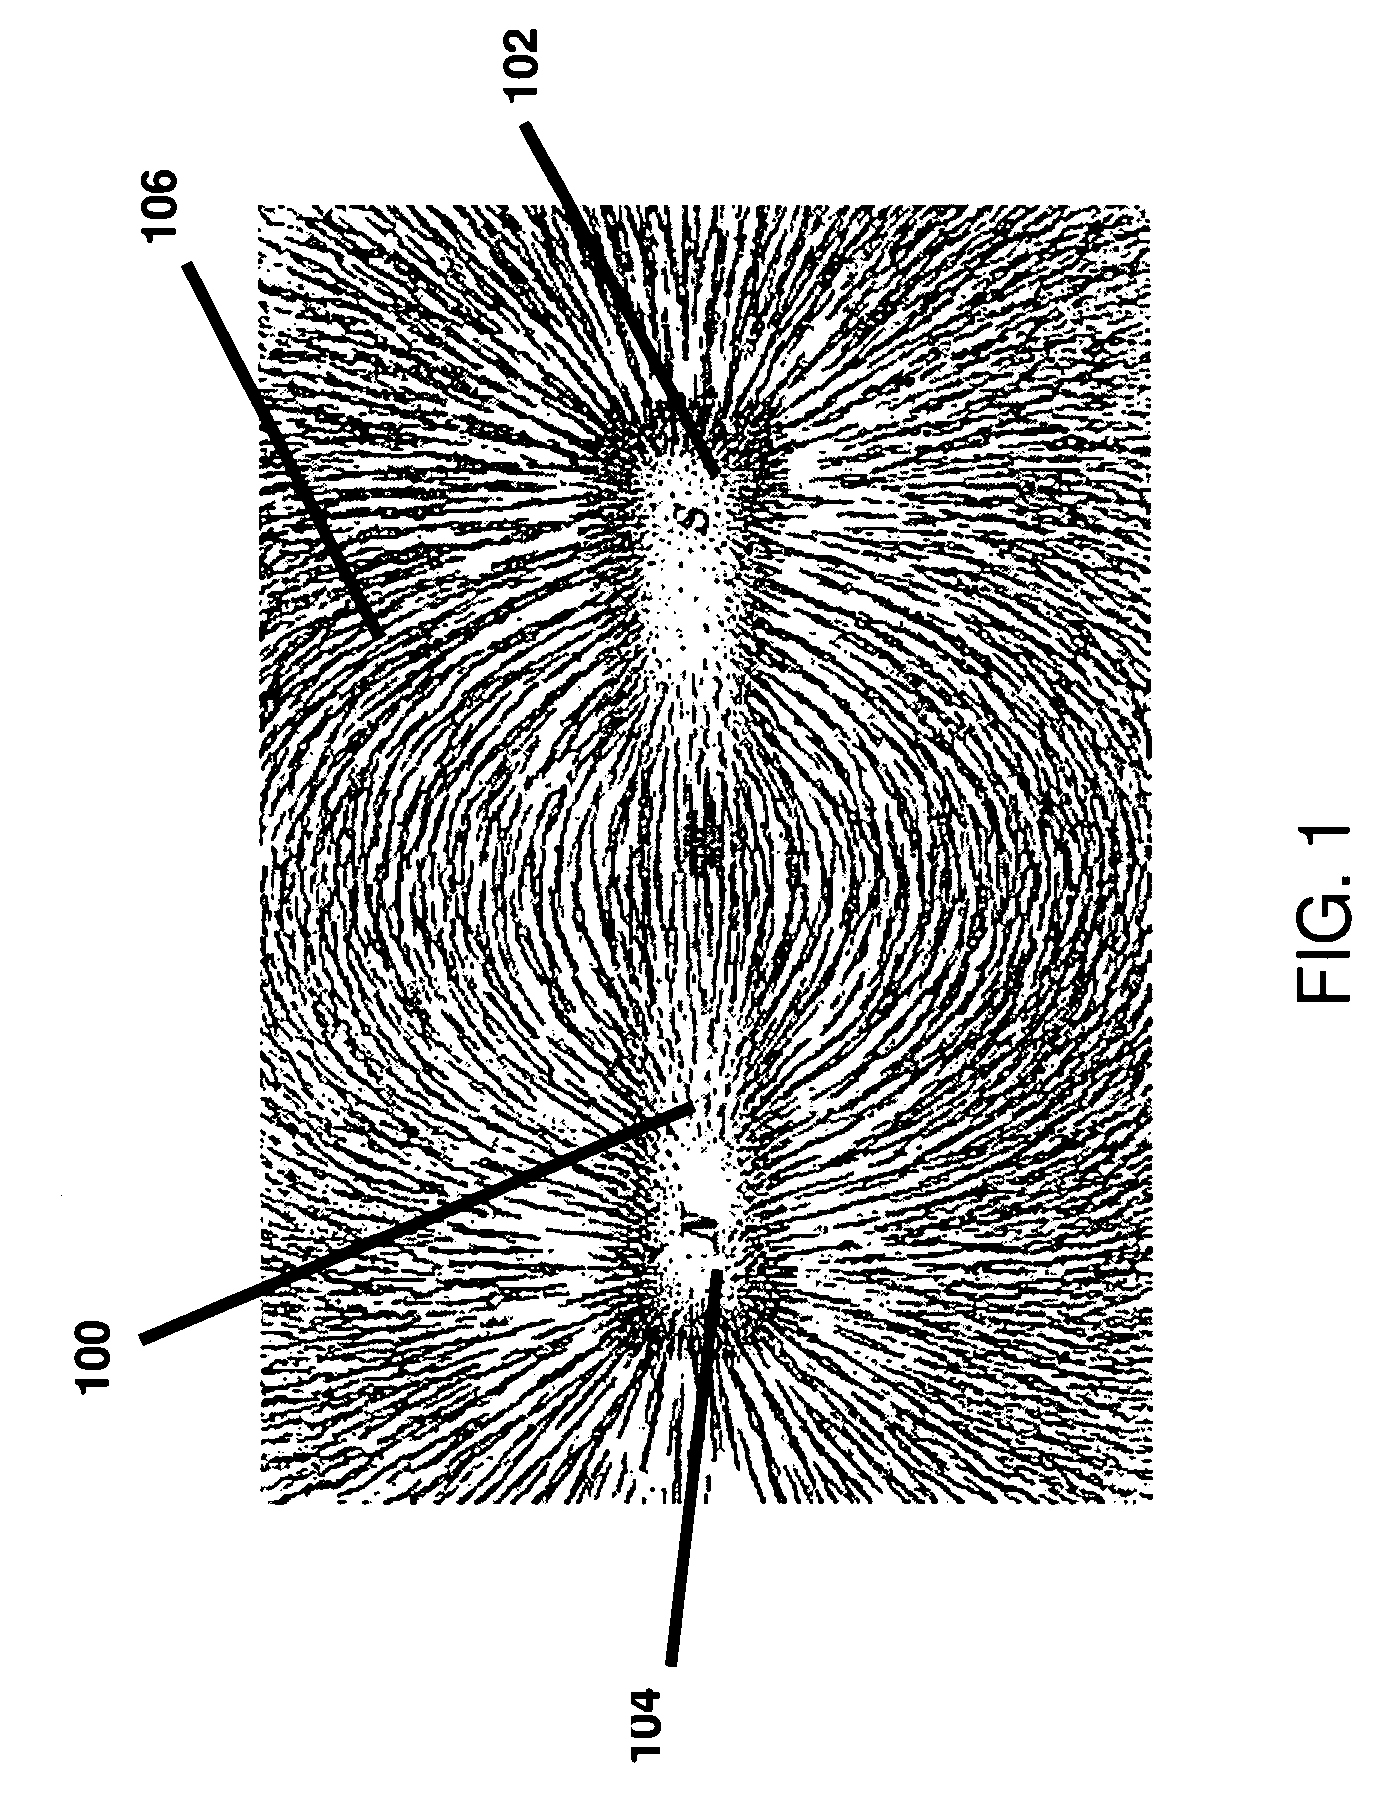 Ring magnet structure having a coded magnet pattern